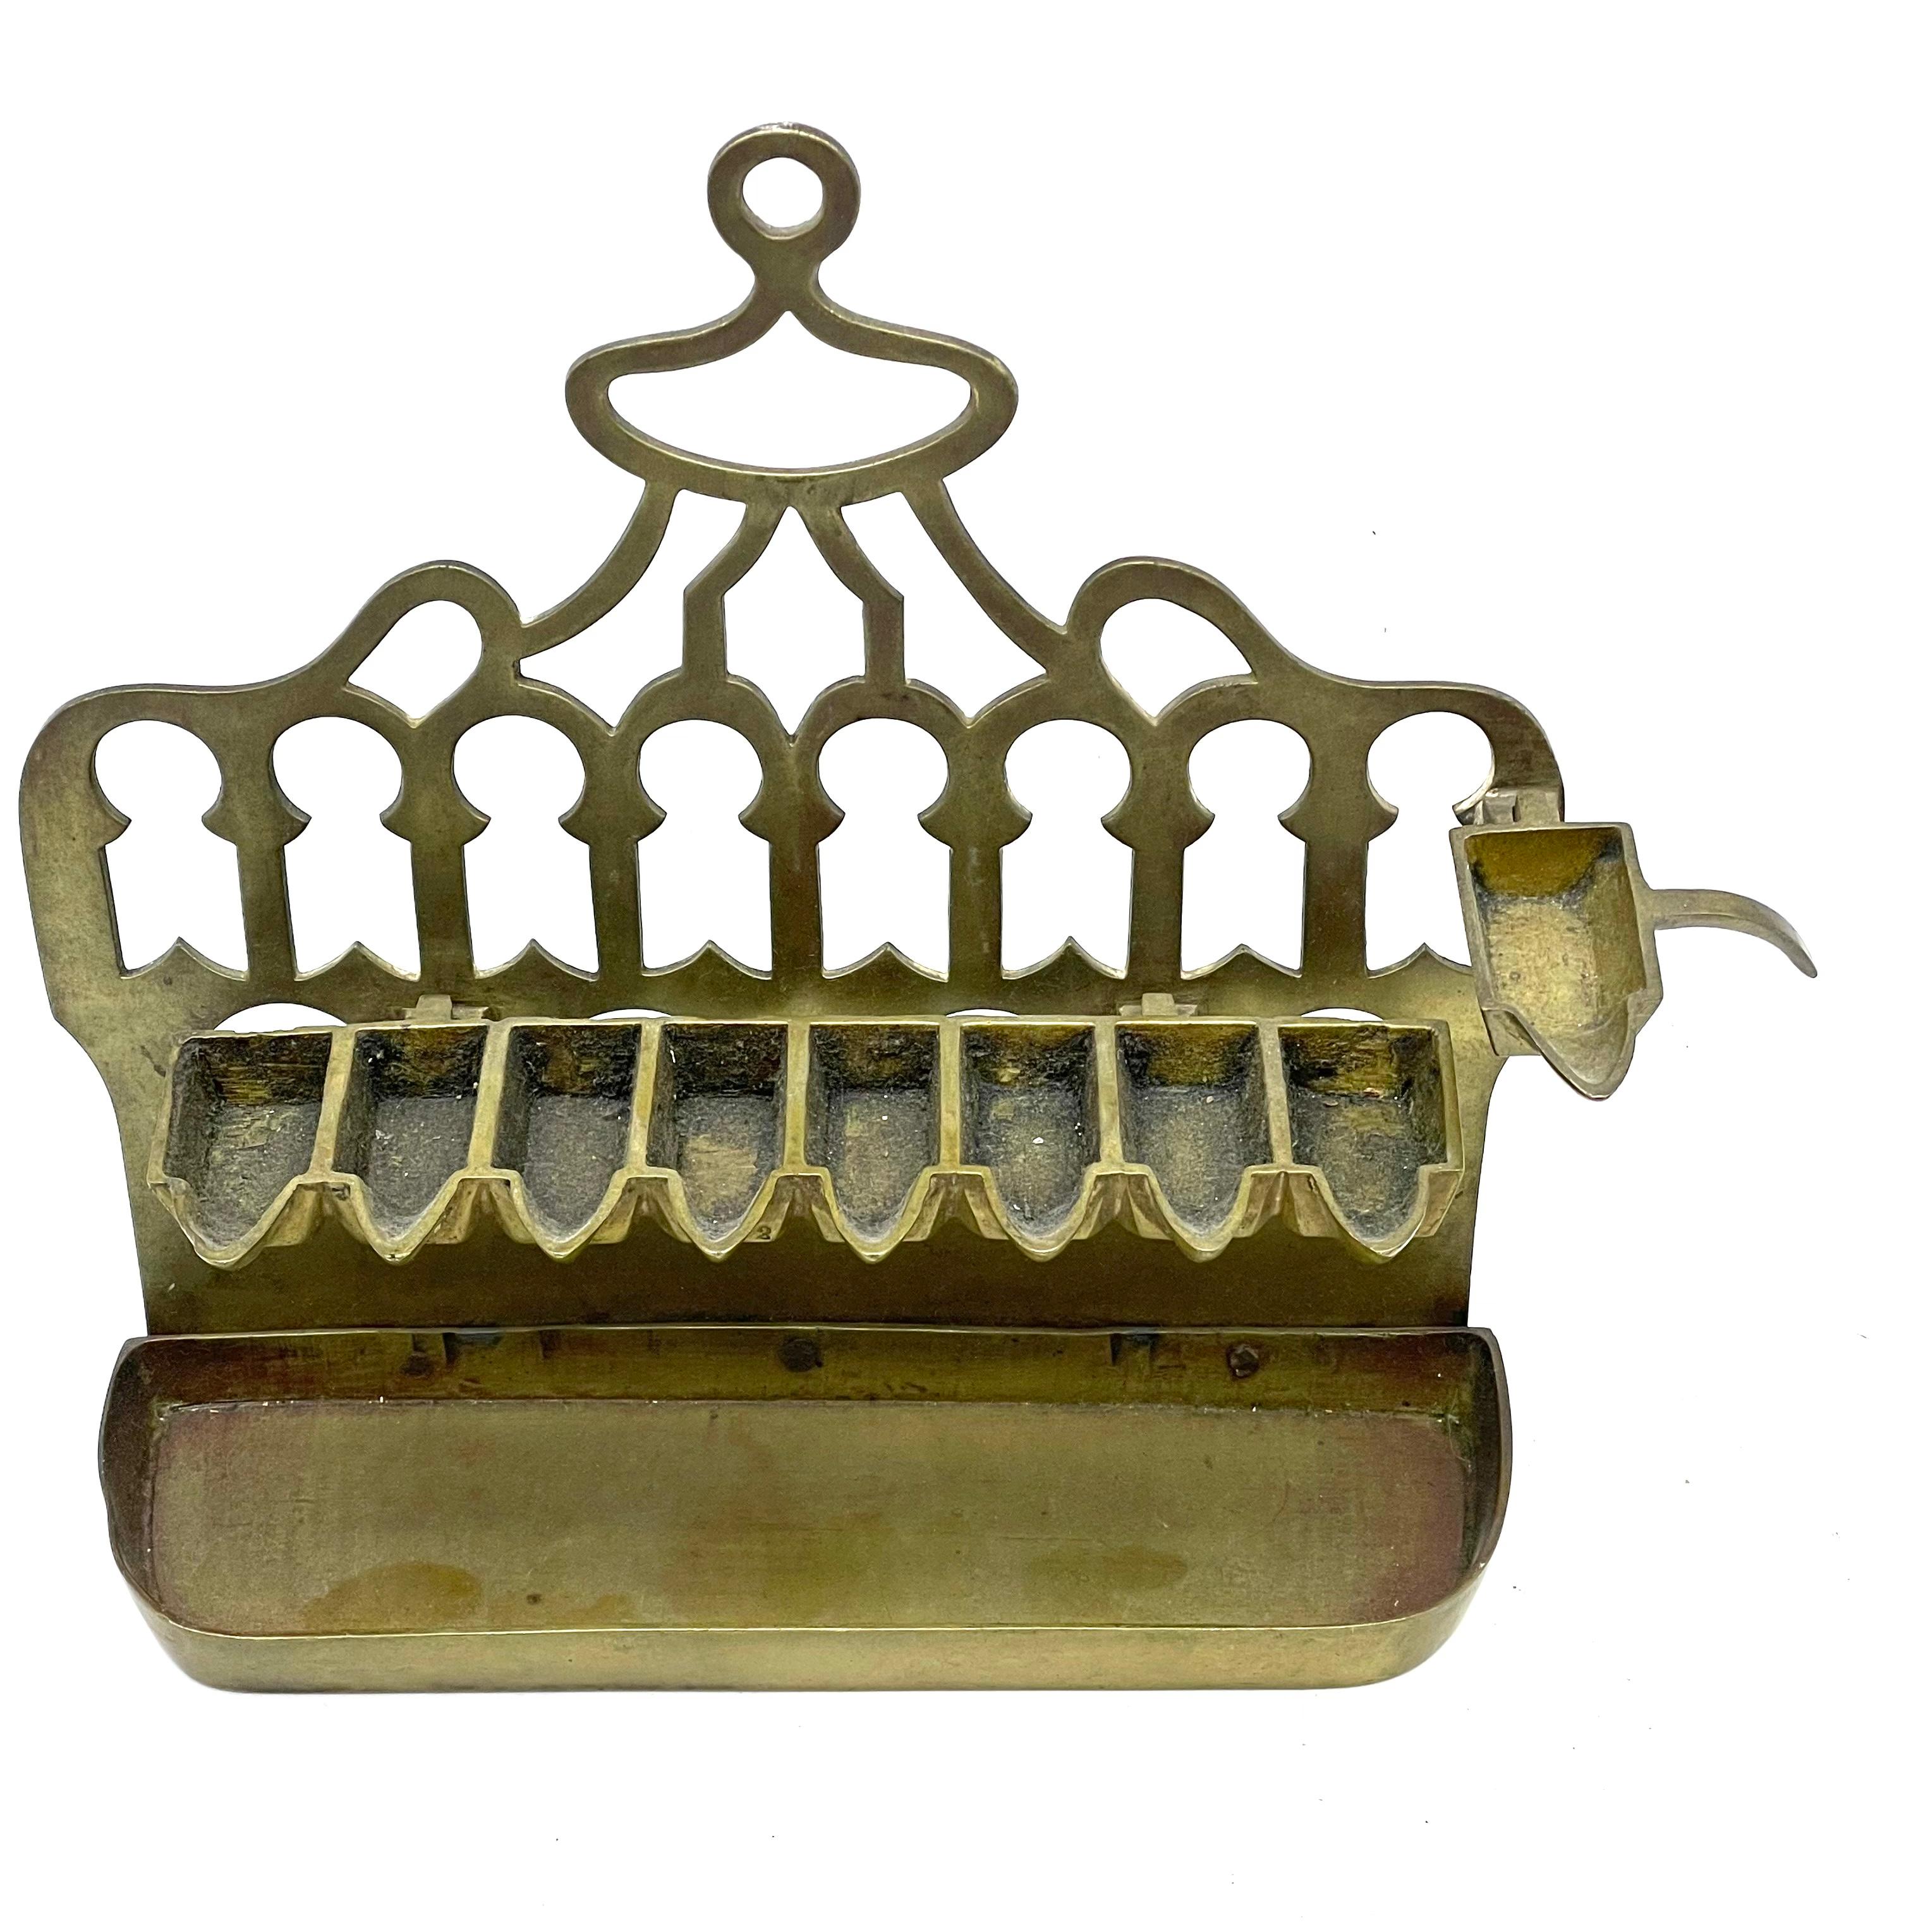 A late 19th century brass casted Hanukkah lamp made in Algeria. The lamp is made of three central parts: its body, a tray for placing the oil candles, and a holder for the servant light. The parts can be deconstructed, facilitating the lightning of